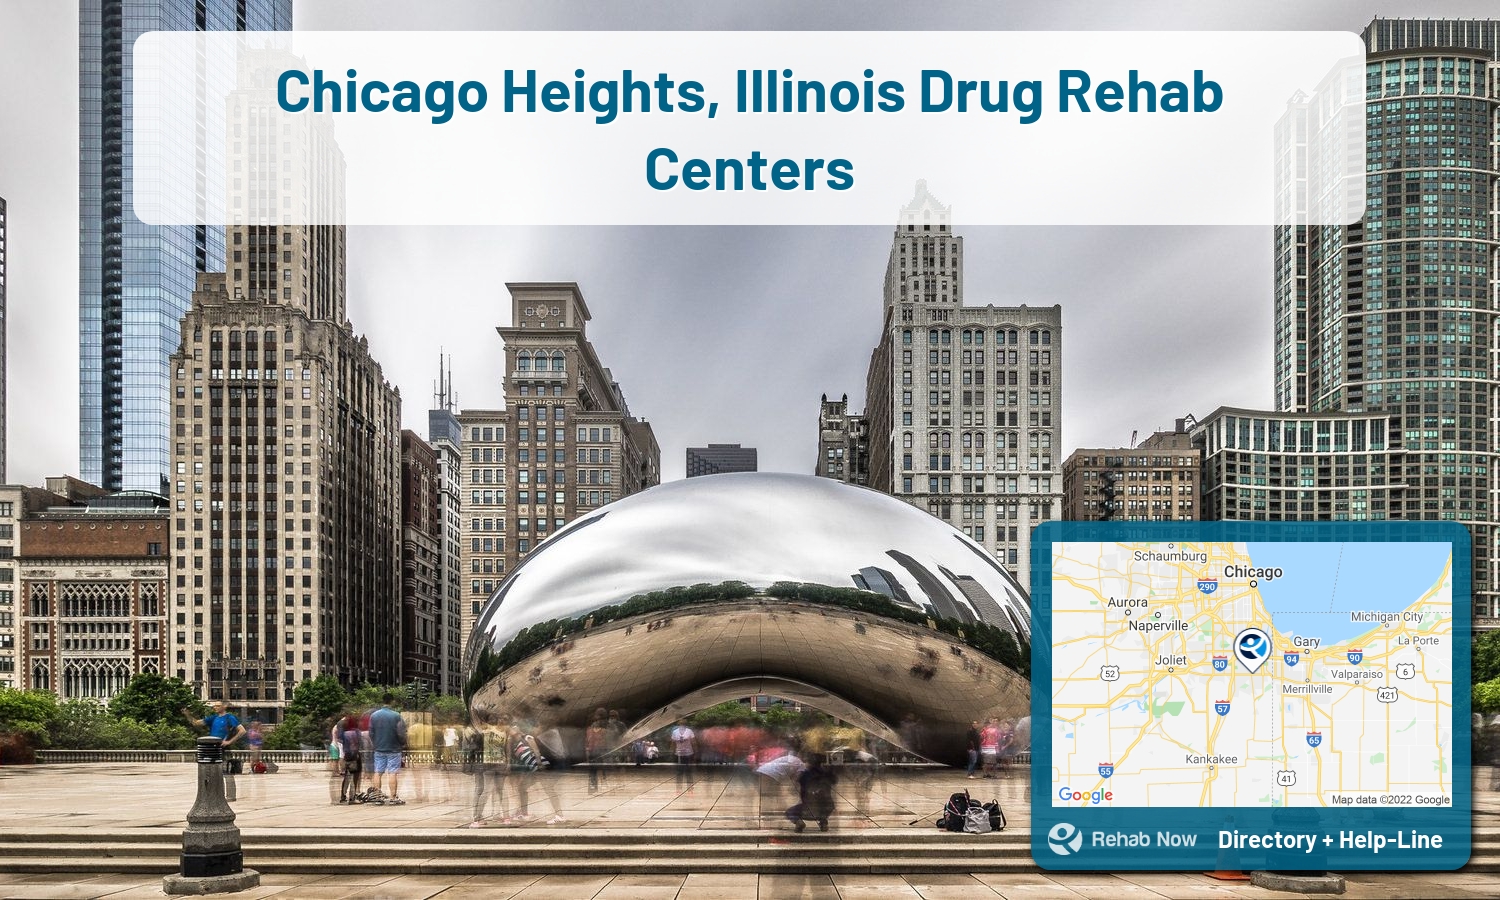 Chicago Heights, IL Treatment Centers. Find drug rehab in Chicago Heights, Illinois, or detox and treatment programs. Get the right help now!